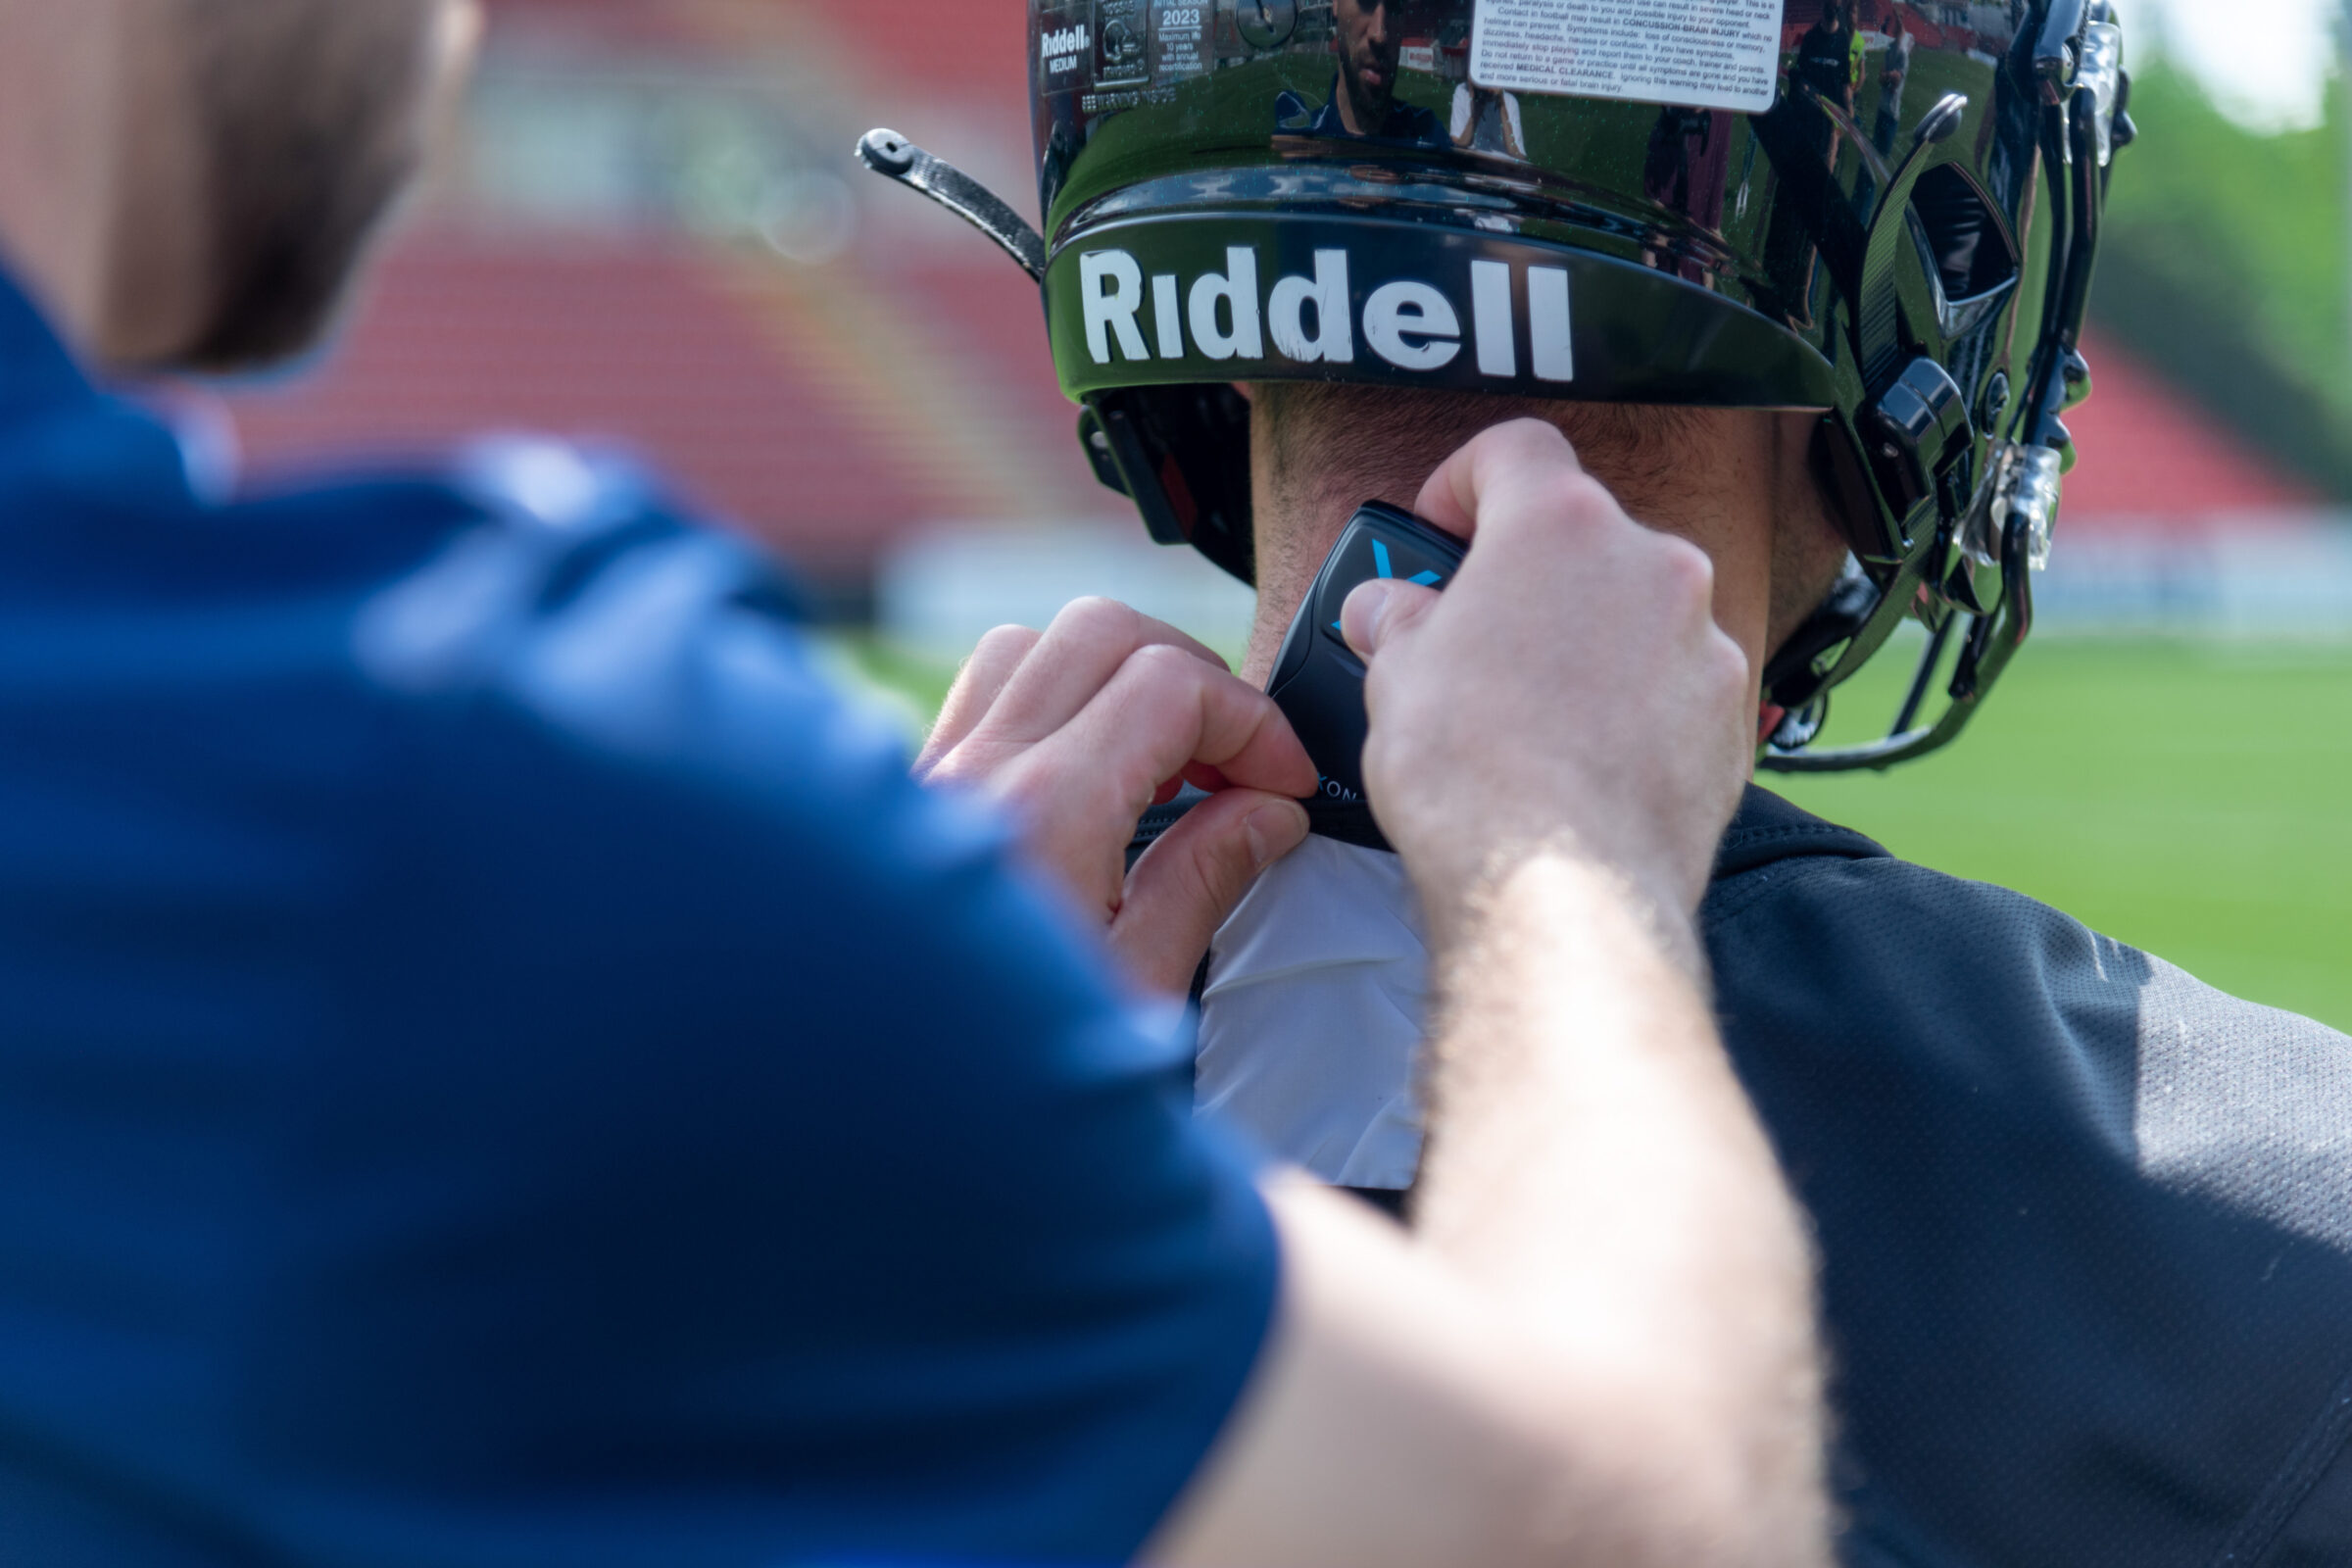 American football players are now being equipped with player trackers that provide coaches and sports data analysts with vital information that helps prevent injuries in football.